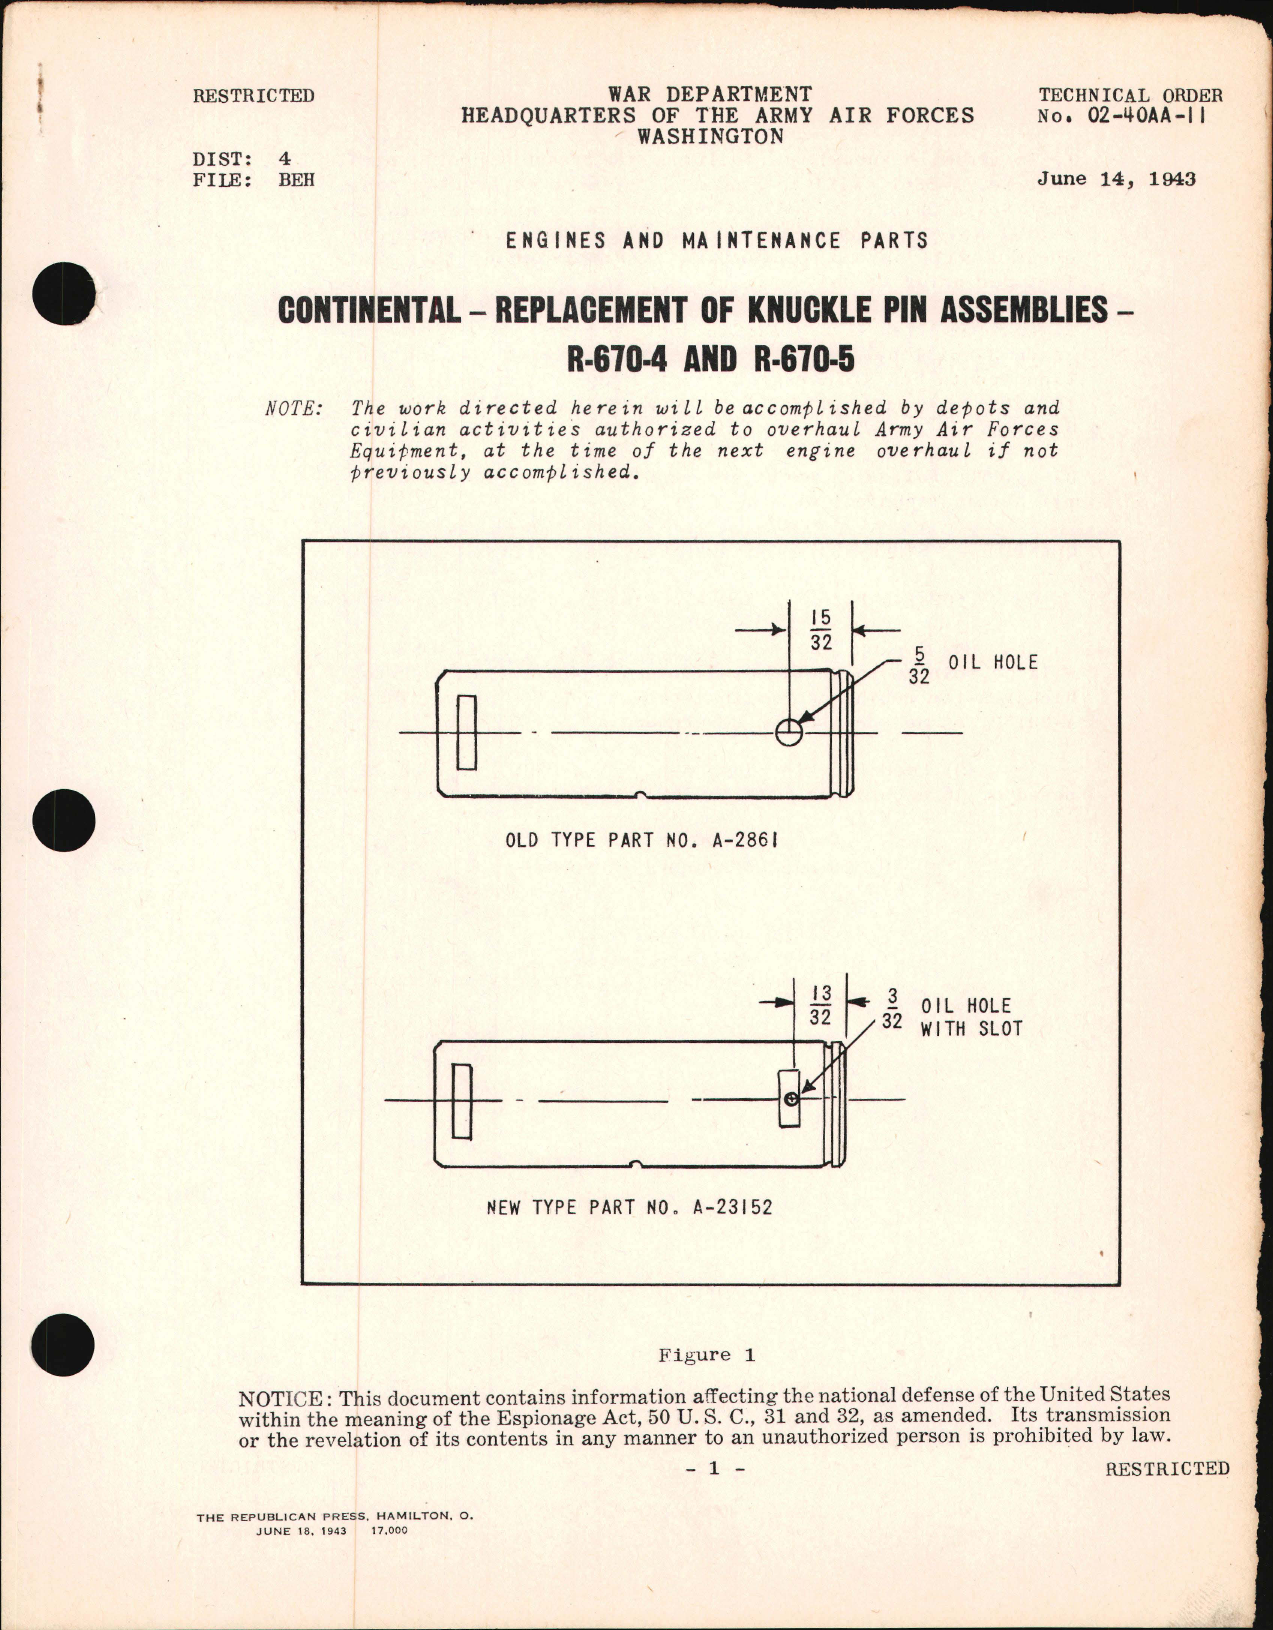 Sample page 1 from AirCorps Library document: Replacement of Knuckle Pin Assemblies - R-670-4 and R-670-5 Engines